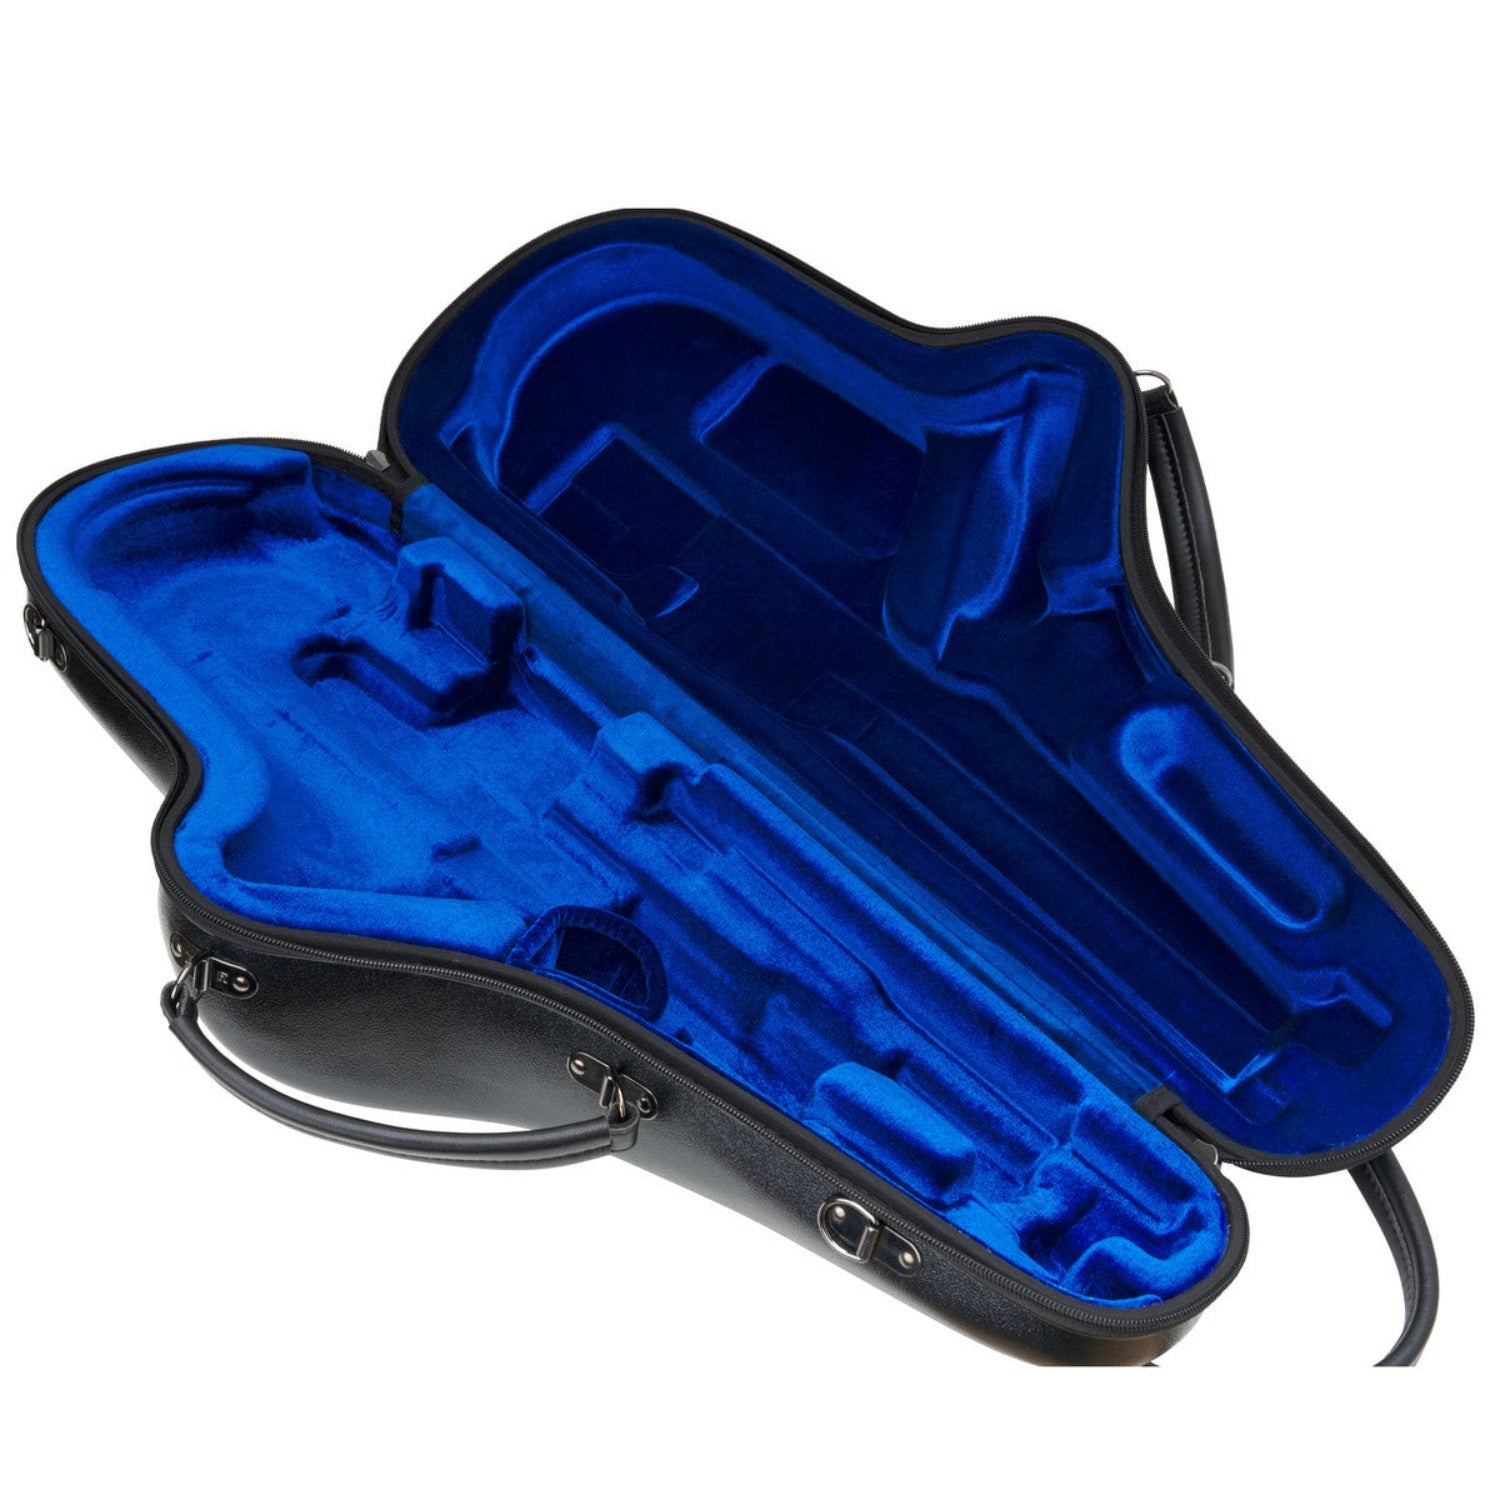 Protec Micro Alto Sax case, laying open to show blue velour interior (empty), against white background, at an angle